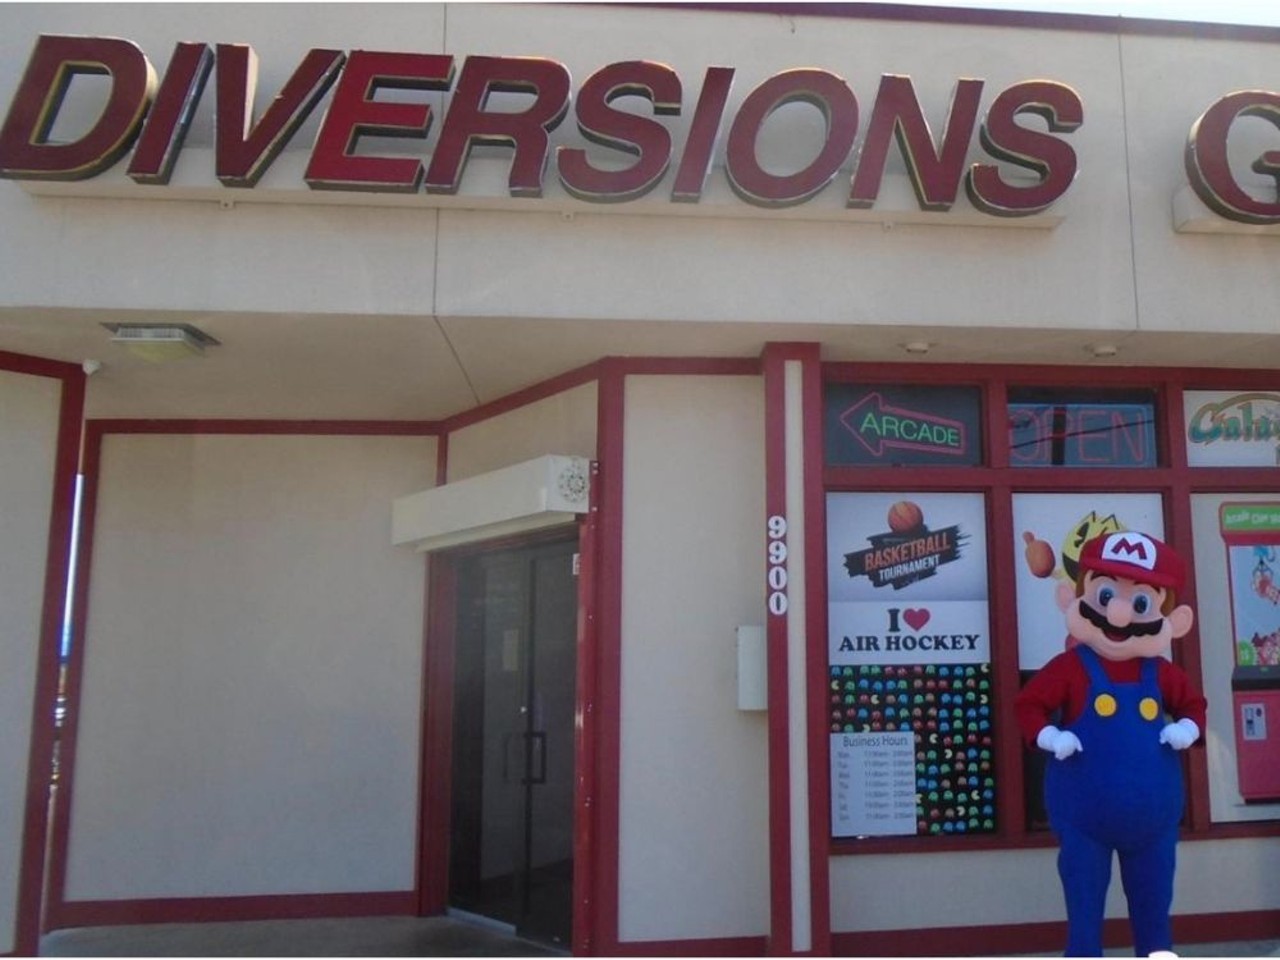 Enjoy classic arcade fun at Diversions Game Room
9900 San Pedro Ave., (210) 341-2561, facebook.com/diversionsgameroom
Diversions Game Room is open until 2 a.m. daily, so night owls can come anytime for old-school arcade fun.